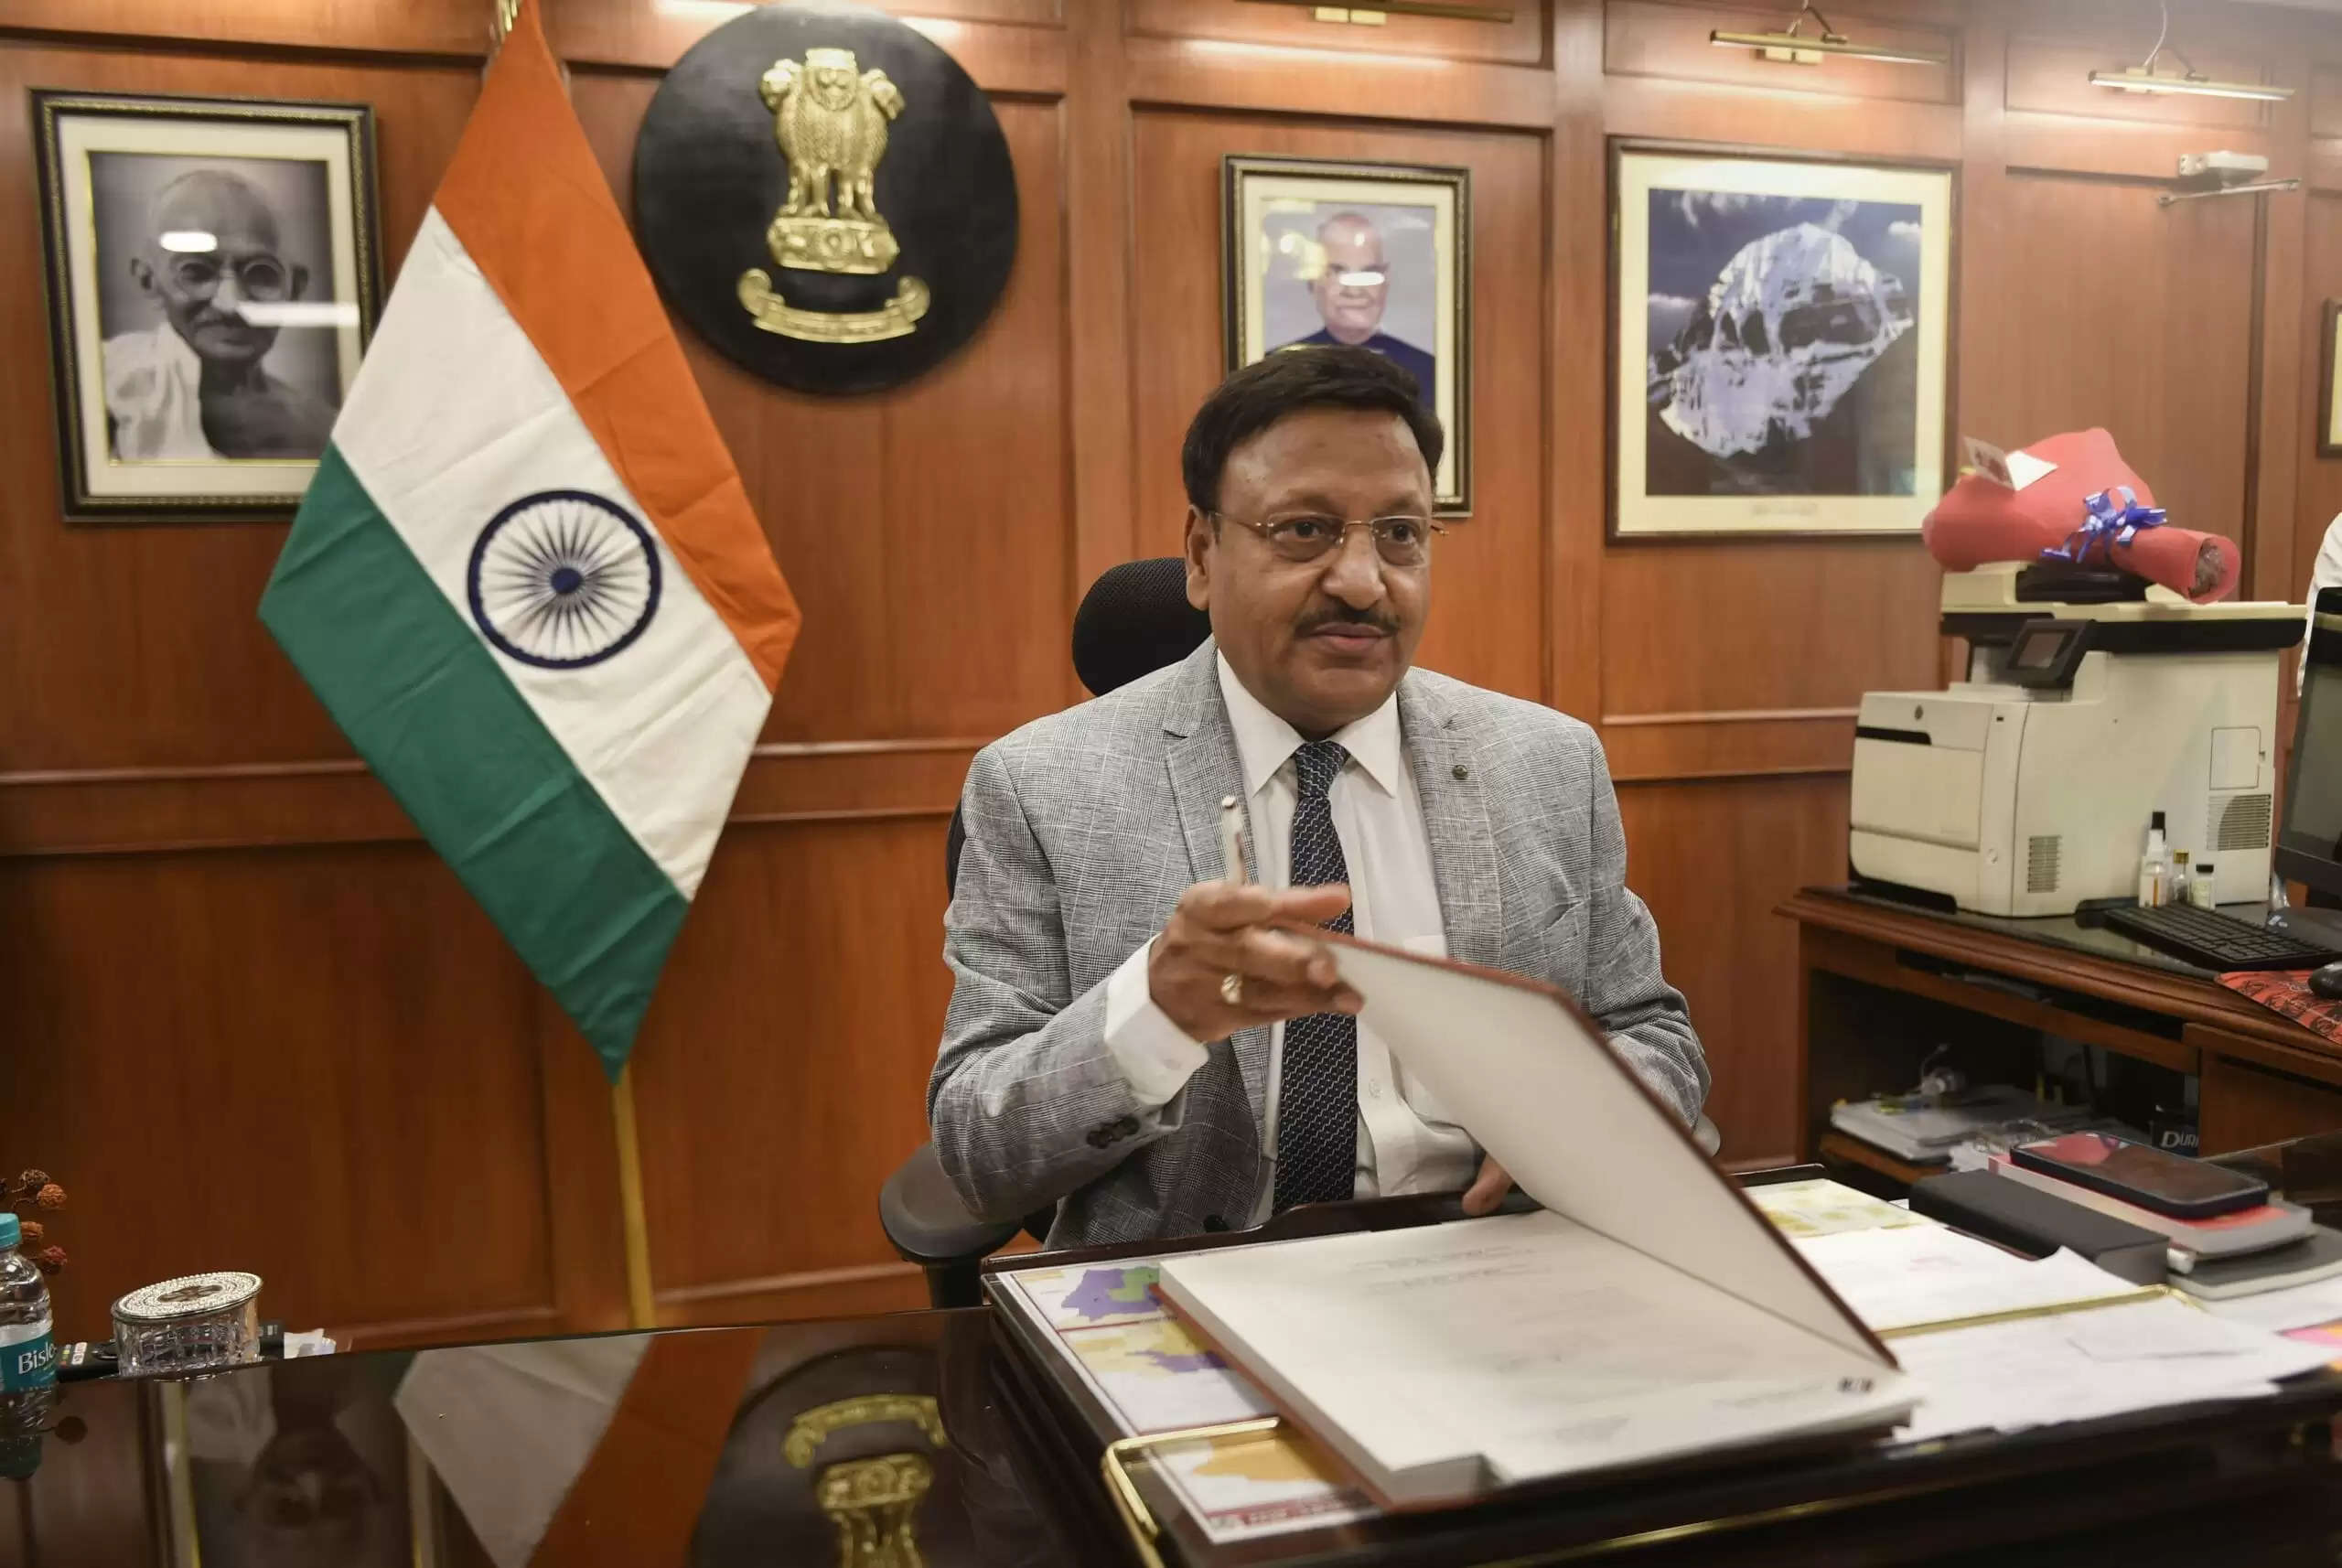 Rajiv-kumar-charges-as-chief-election-commissioner